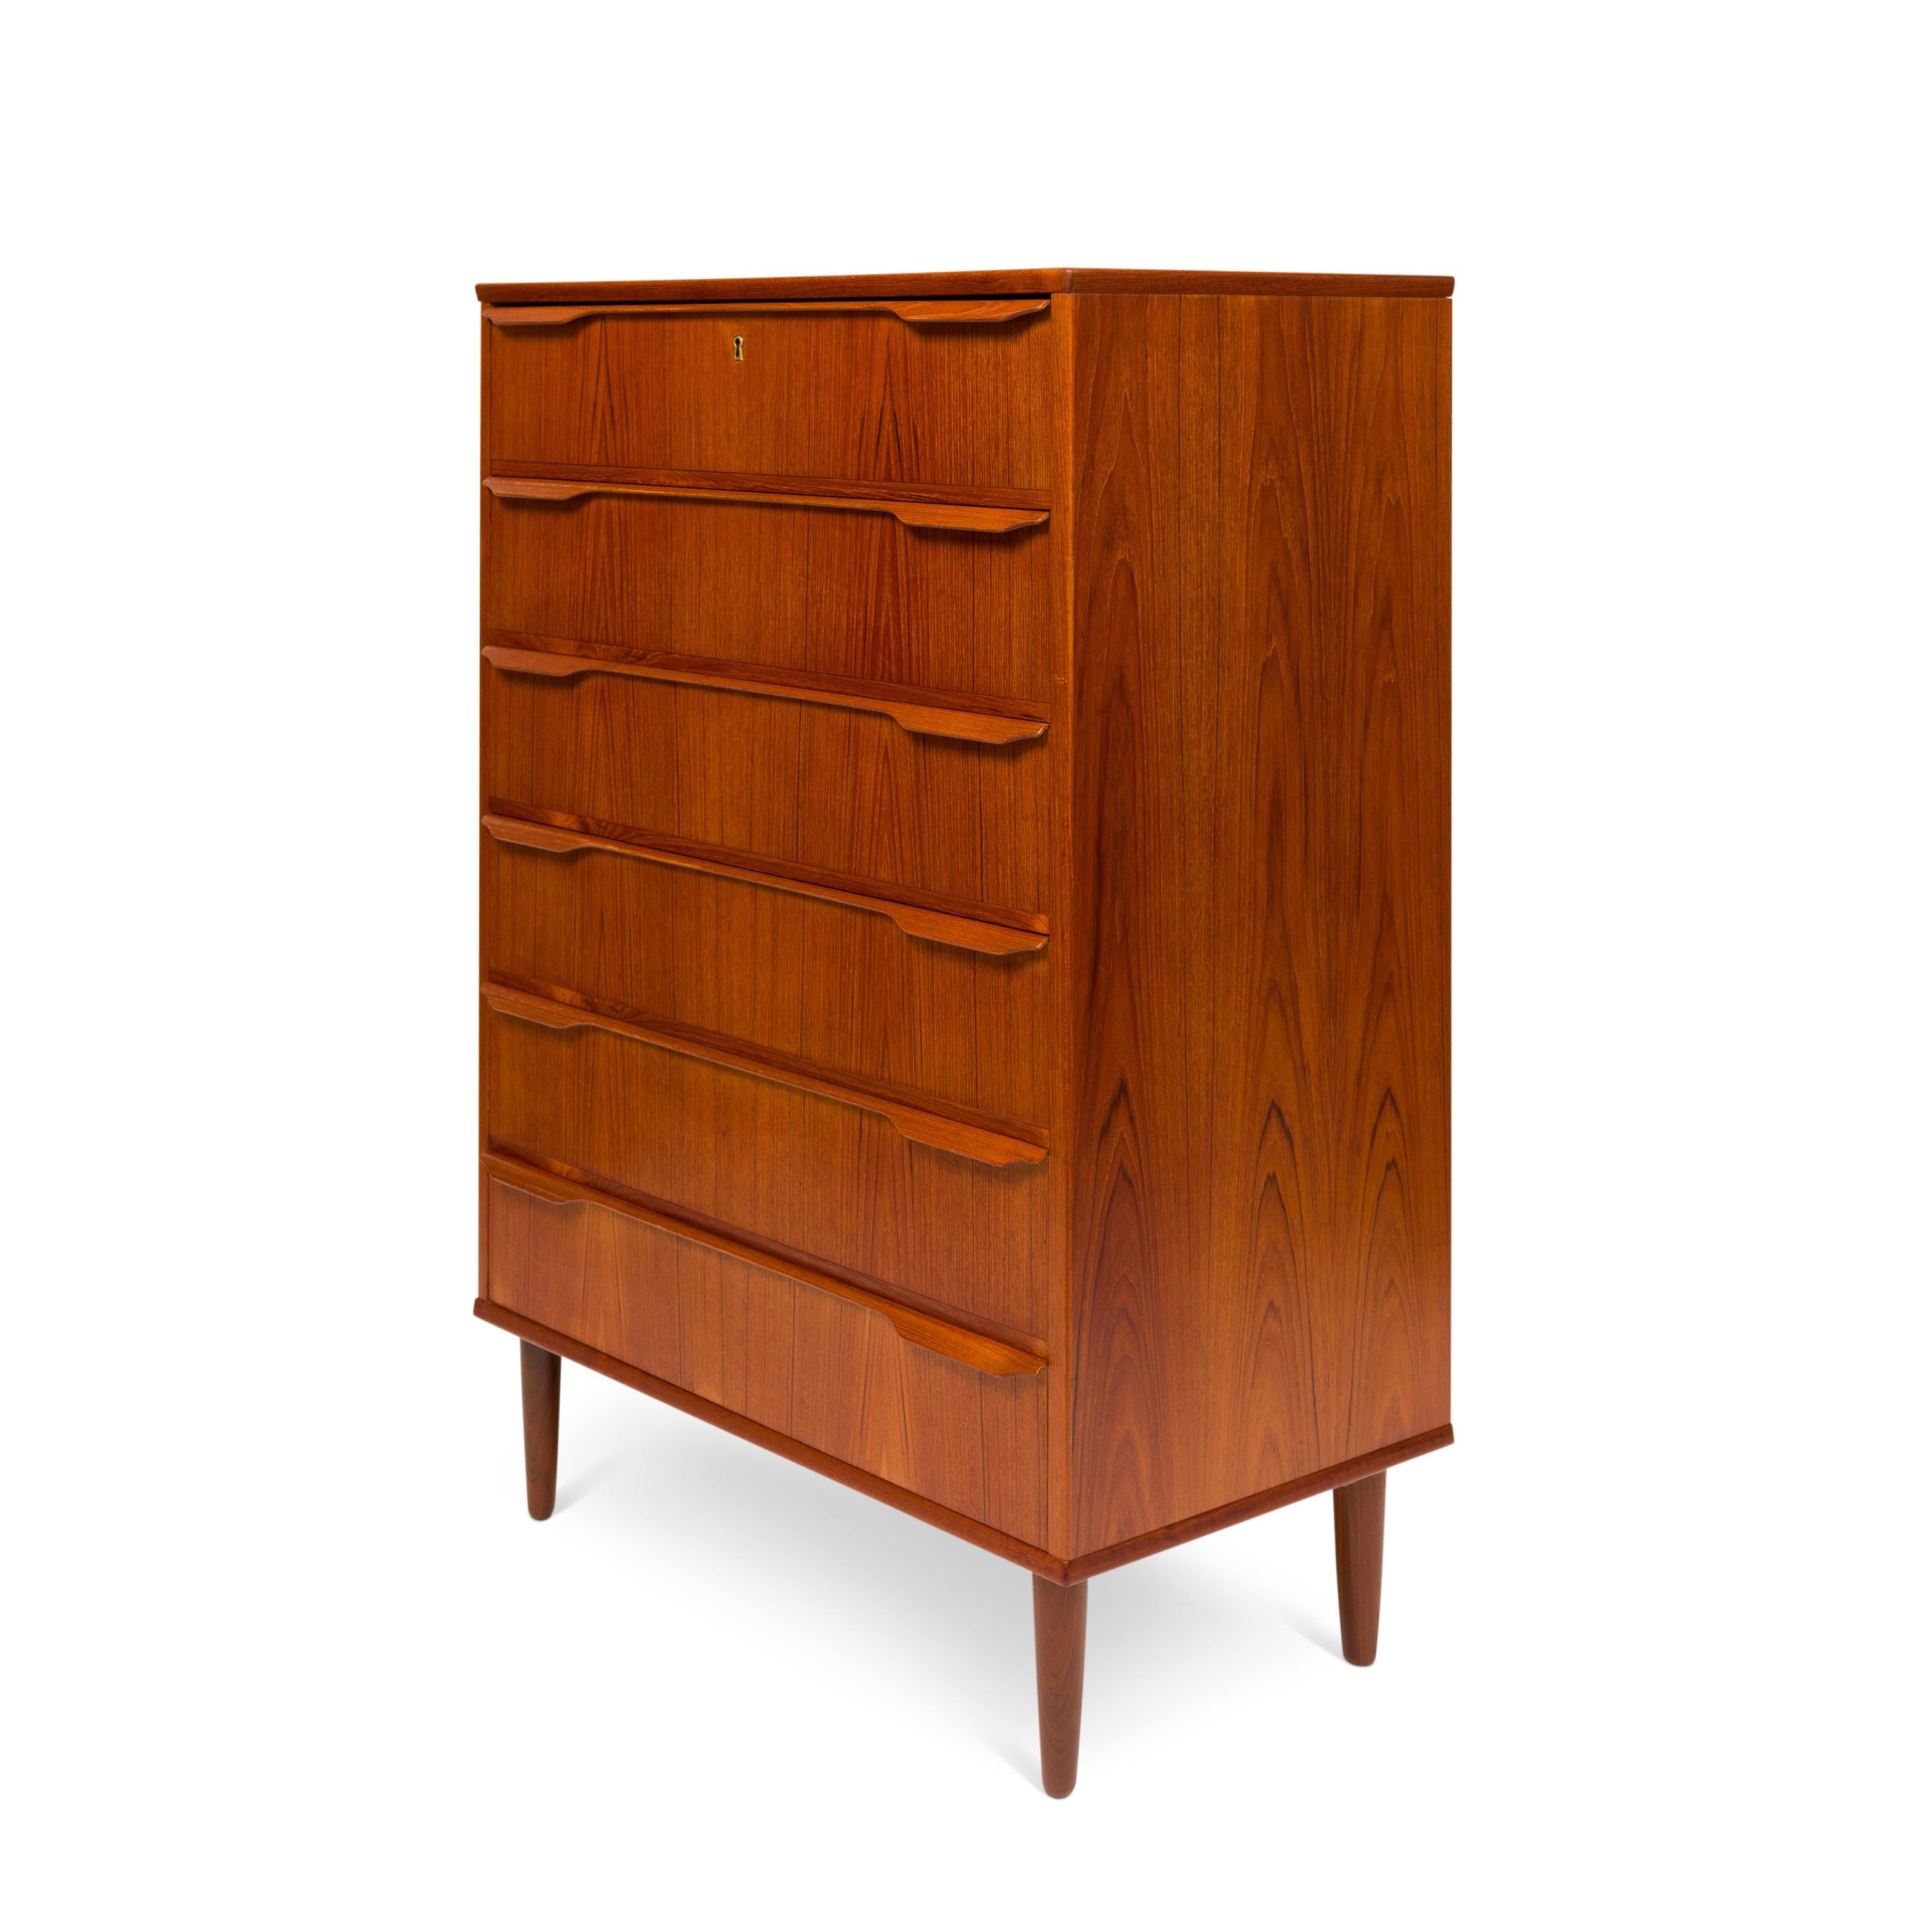 A handsome 1960s vintage Danish mid-century six-drawer teak tallboy dresser stands as an emblem of timeless design. The chest of drawers exhibits a mesmerizing teak grain, complemented by elongated sculpted drawer pulls. Its embodiment of the Danish